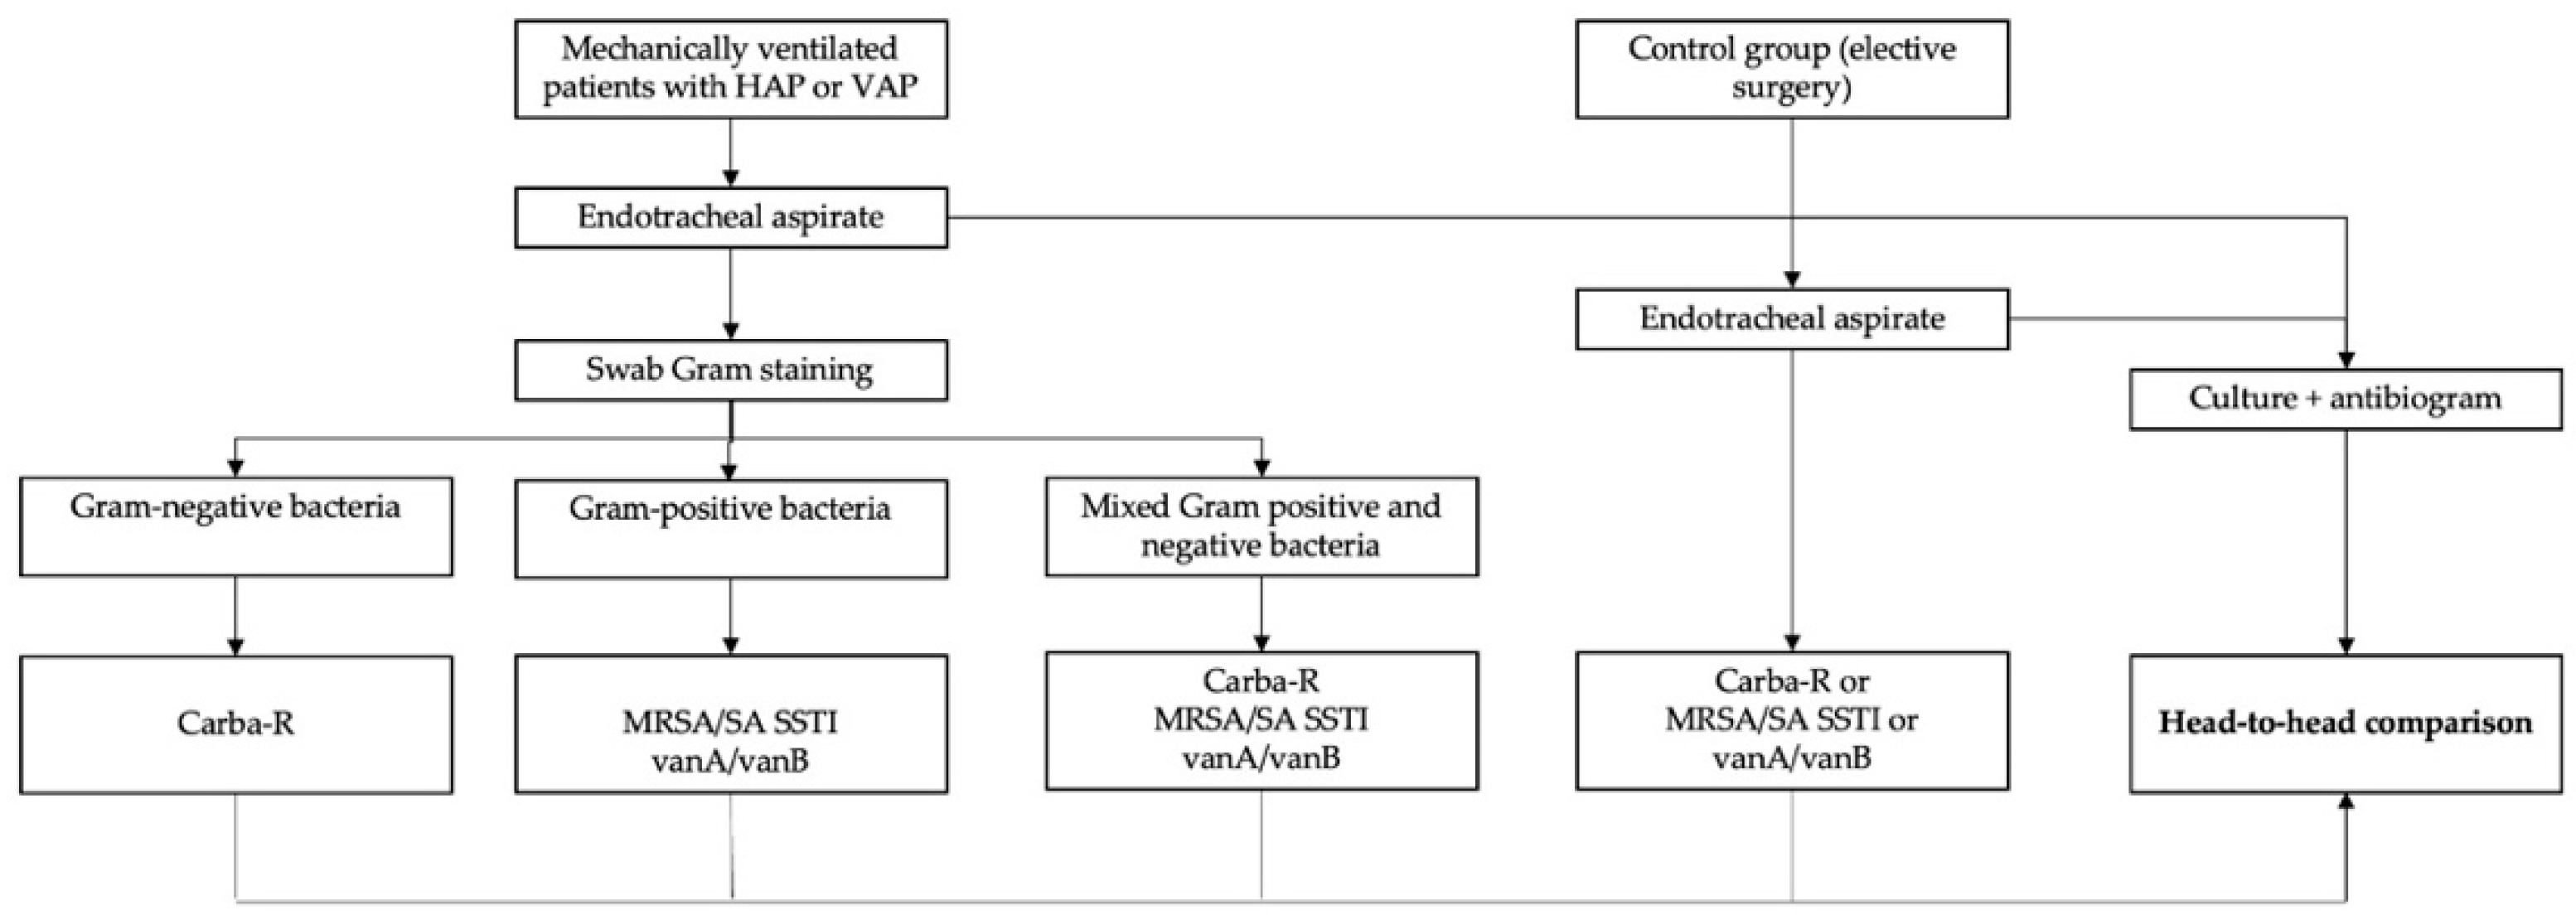 IJMS | Free Full-Text | Rapid Point-of-Care PCR Testing of Drug-Resistant  Strains on Endotracheal Aspirate Samples: A Repurposed Effective Tool in  the Stepwise Approach of Healthcare-Acquired Pneumonia&mdash;A Pilot Study